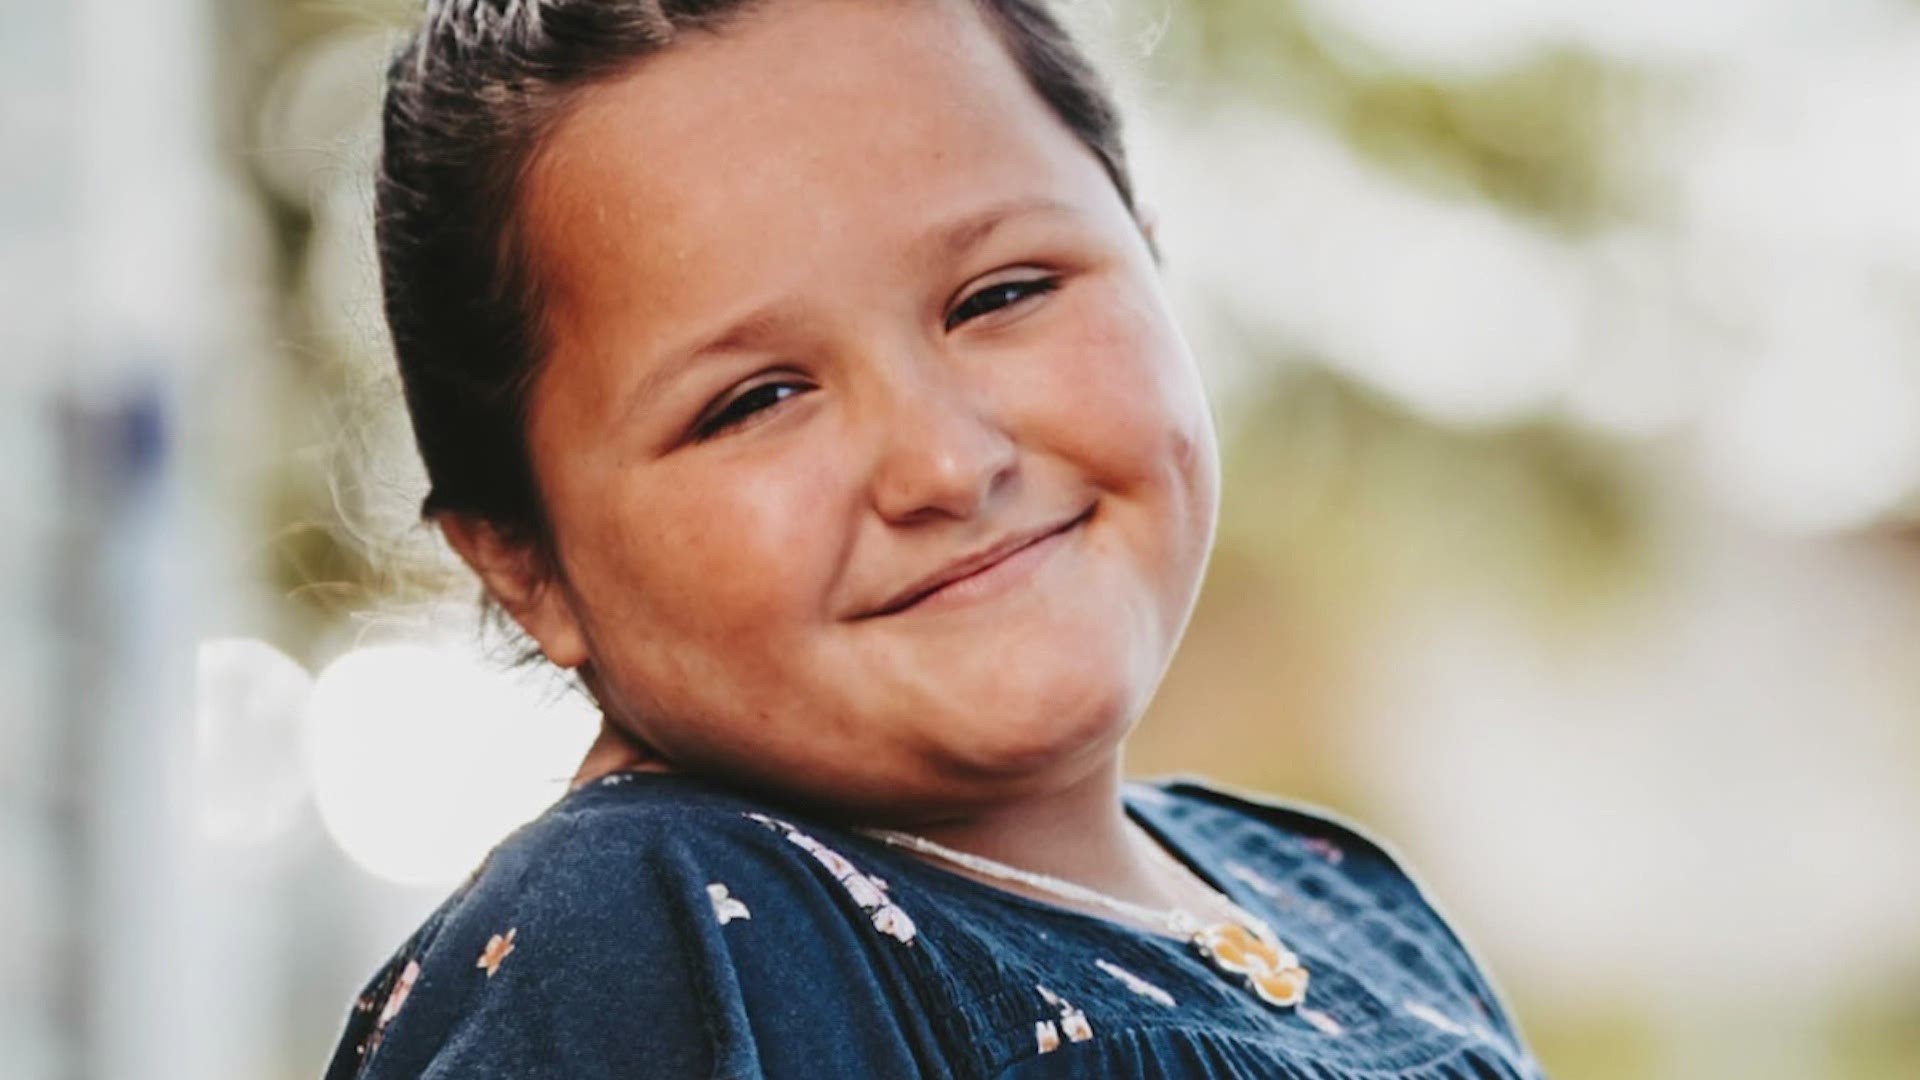 11-year-old Alainah Ortiz is just like any other little girl. Except that she's one of only 50,000 people in the world living with a rare bone disease.